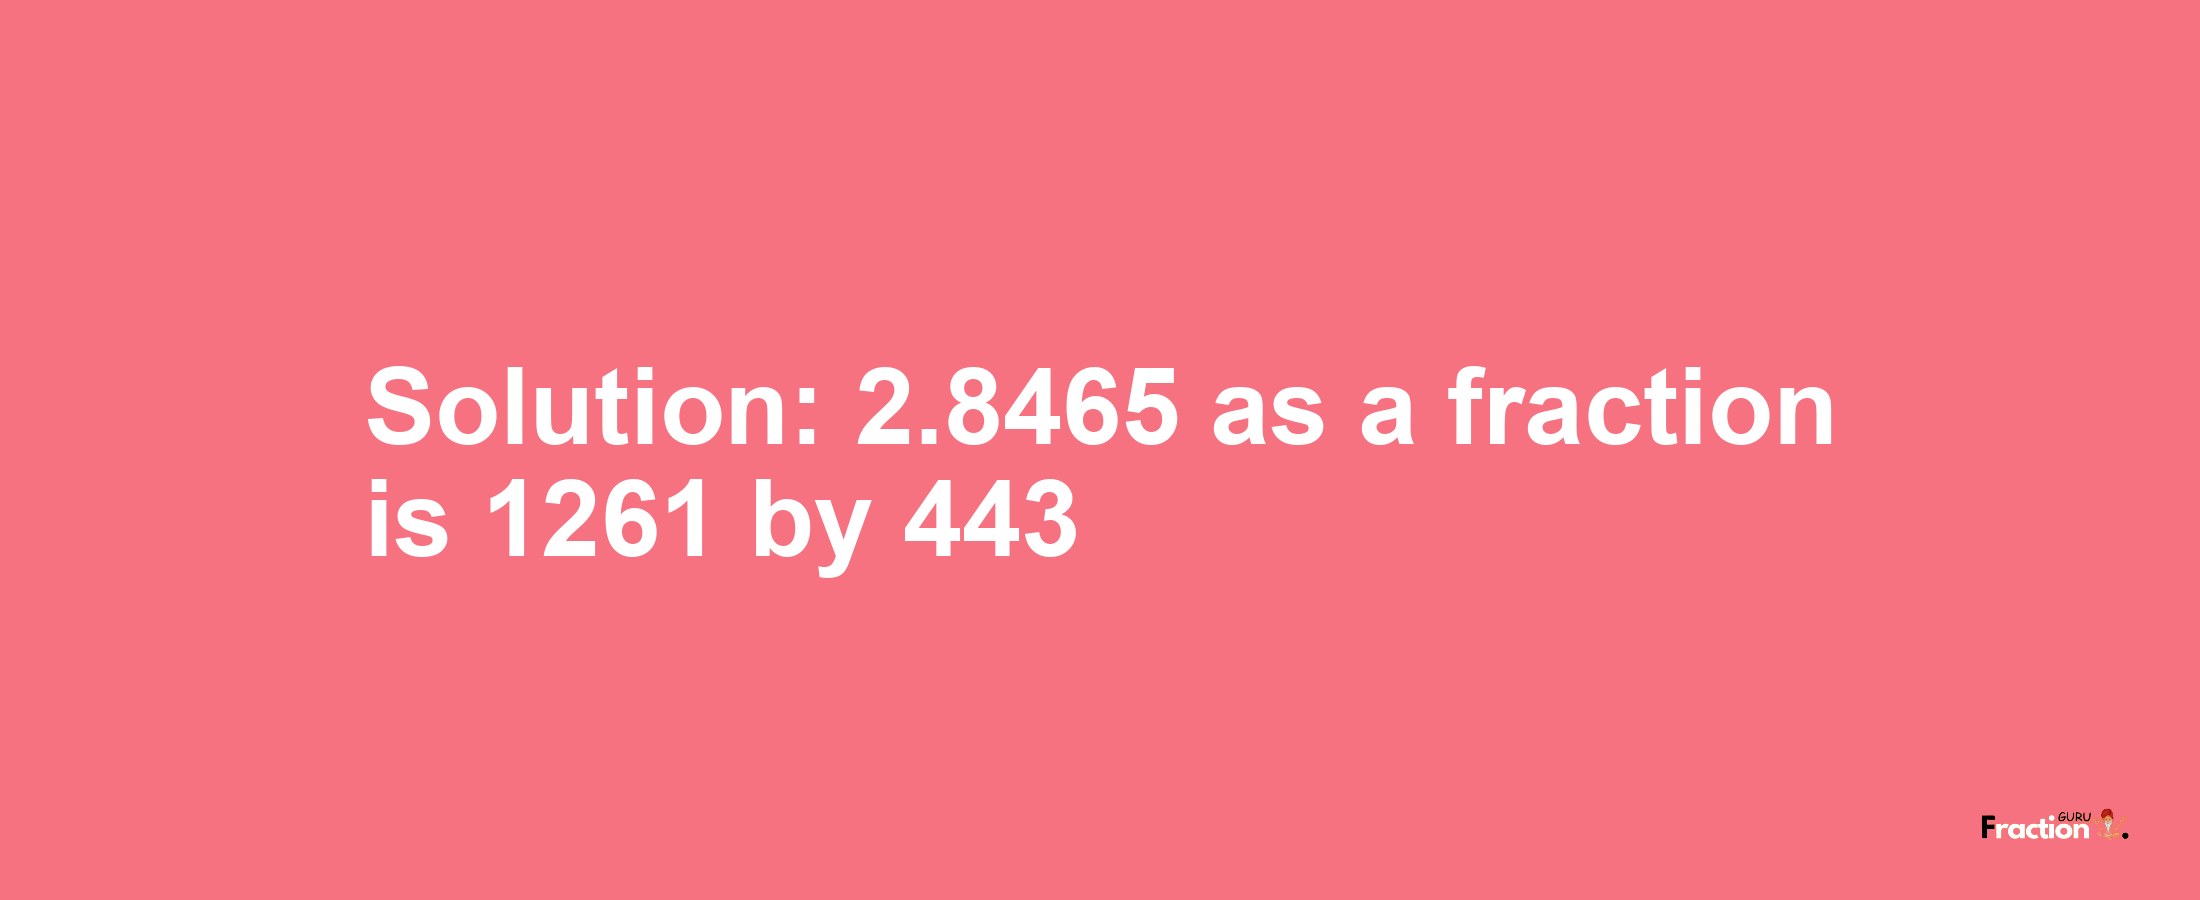 Solution:2.8465 as a fraction is 1261/443